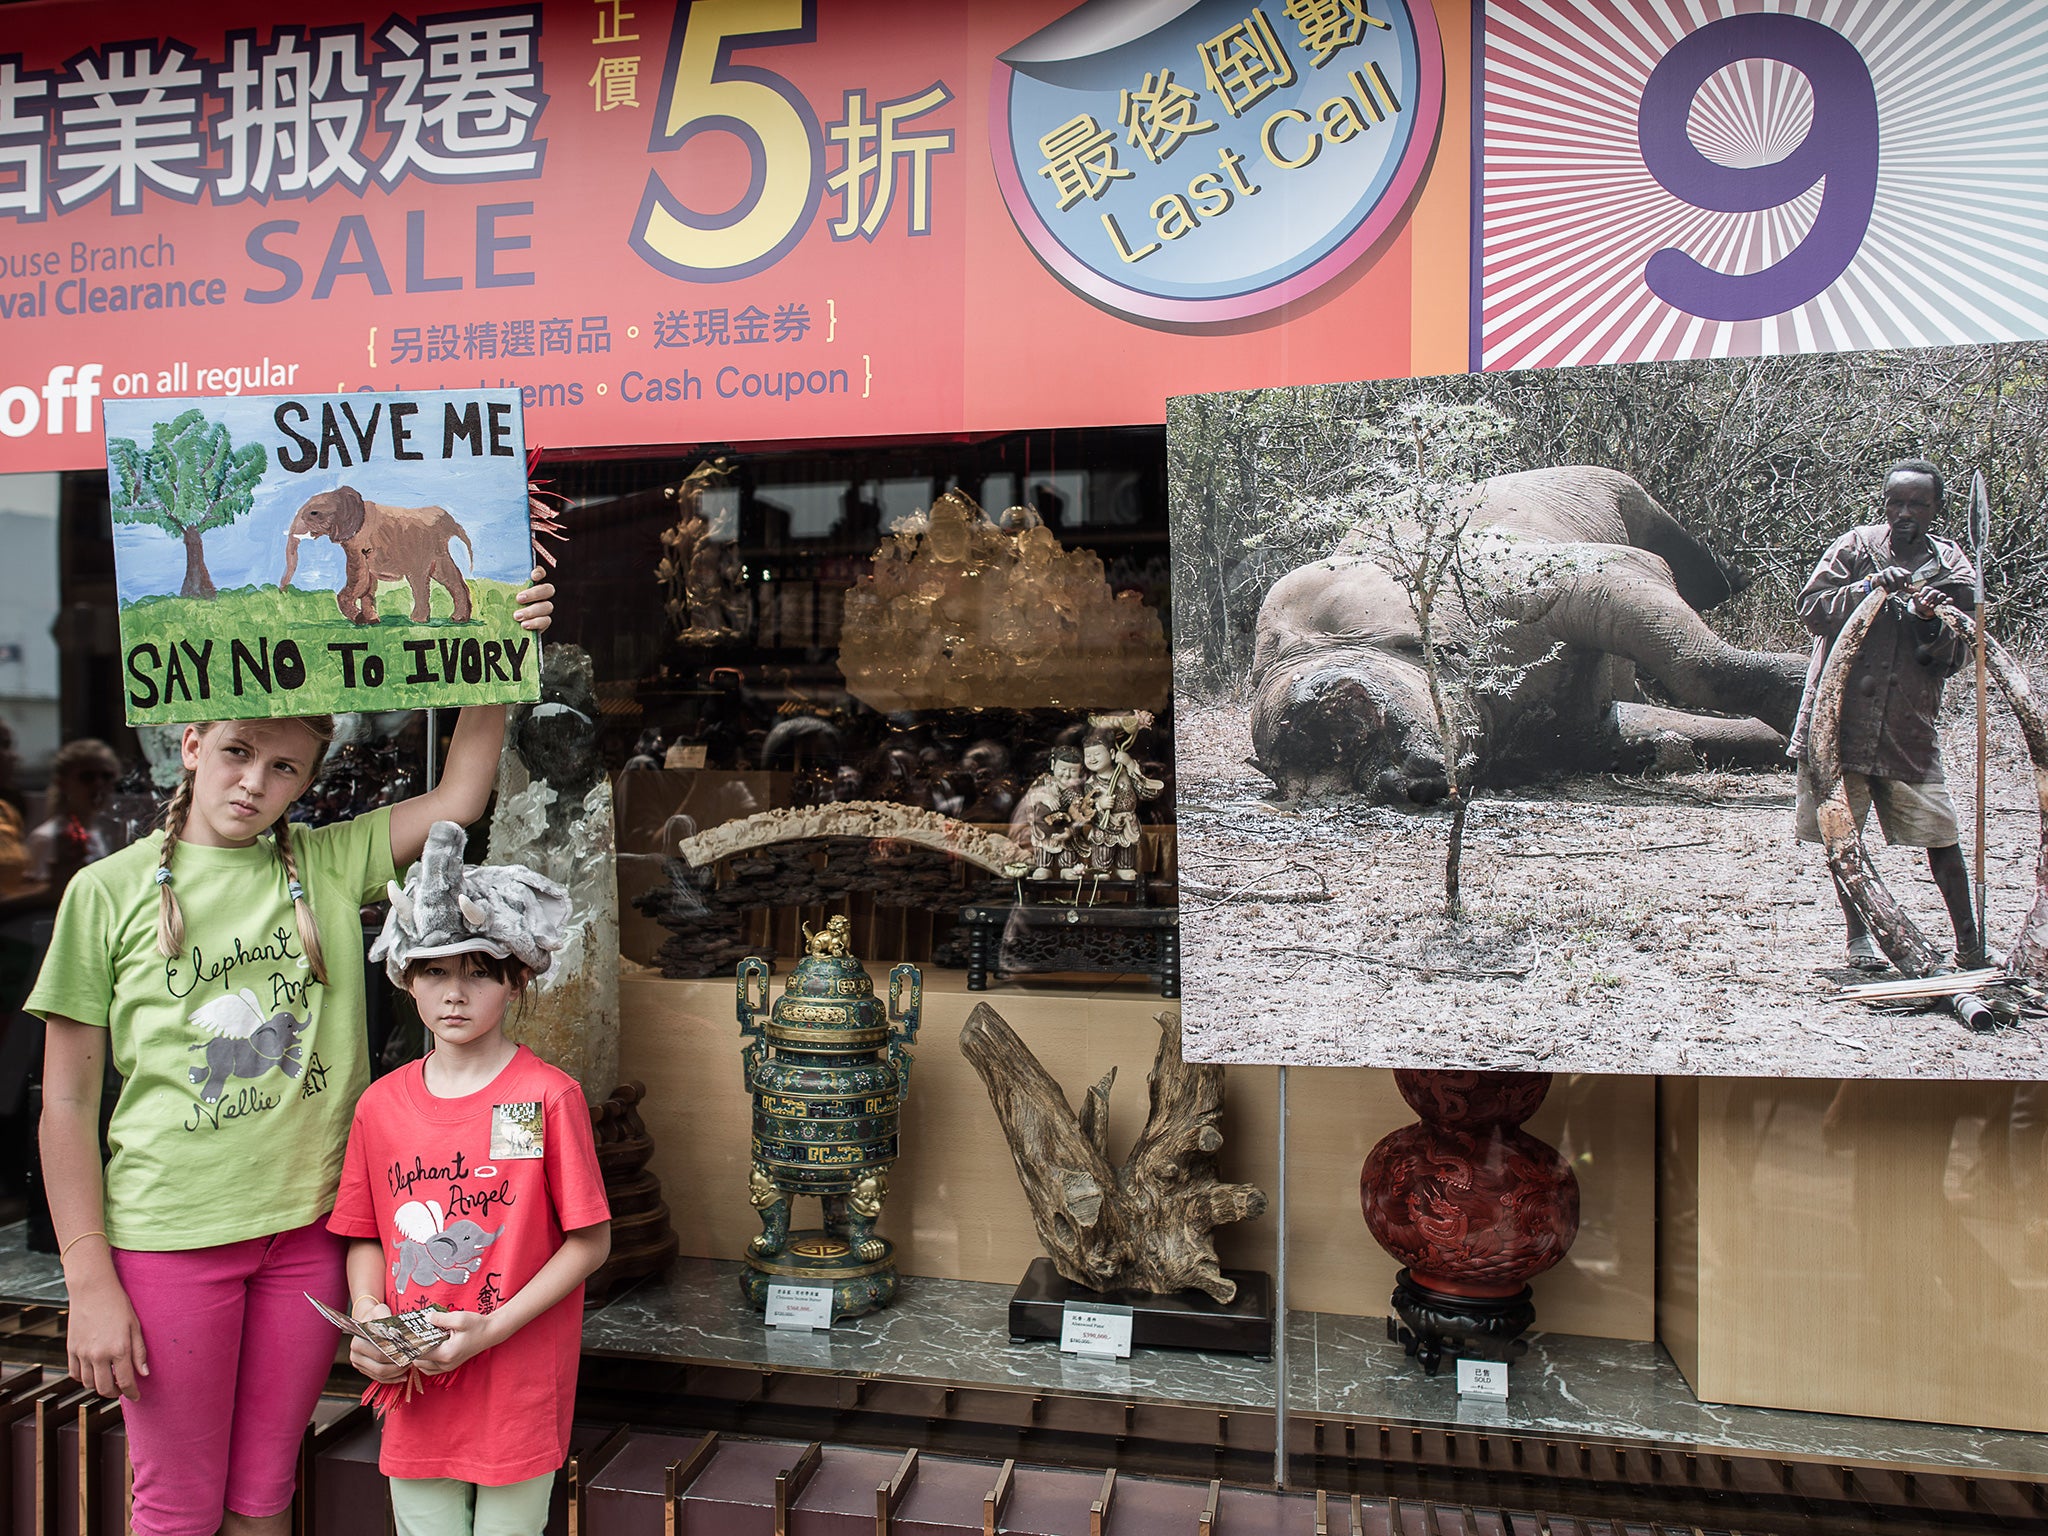 A ban on ivory imports has been introduced in Beijing with immediate effect